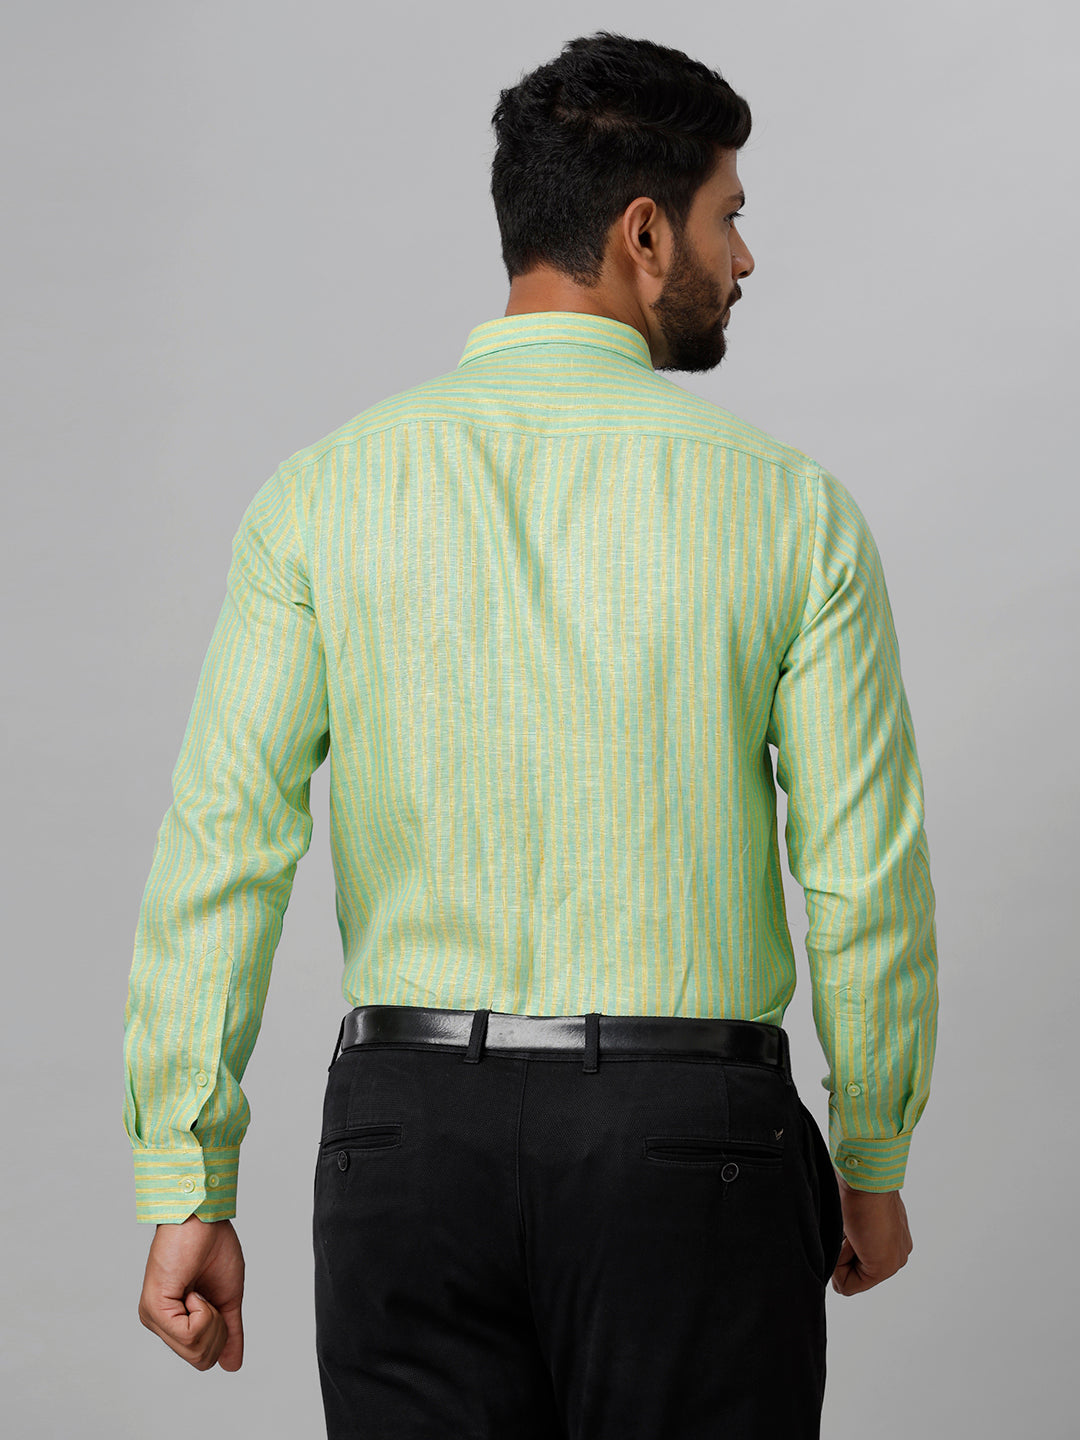 Mens Pure Linen Striped Full Sleeves Green & Yellow Shirt LS6-Back view